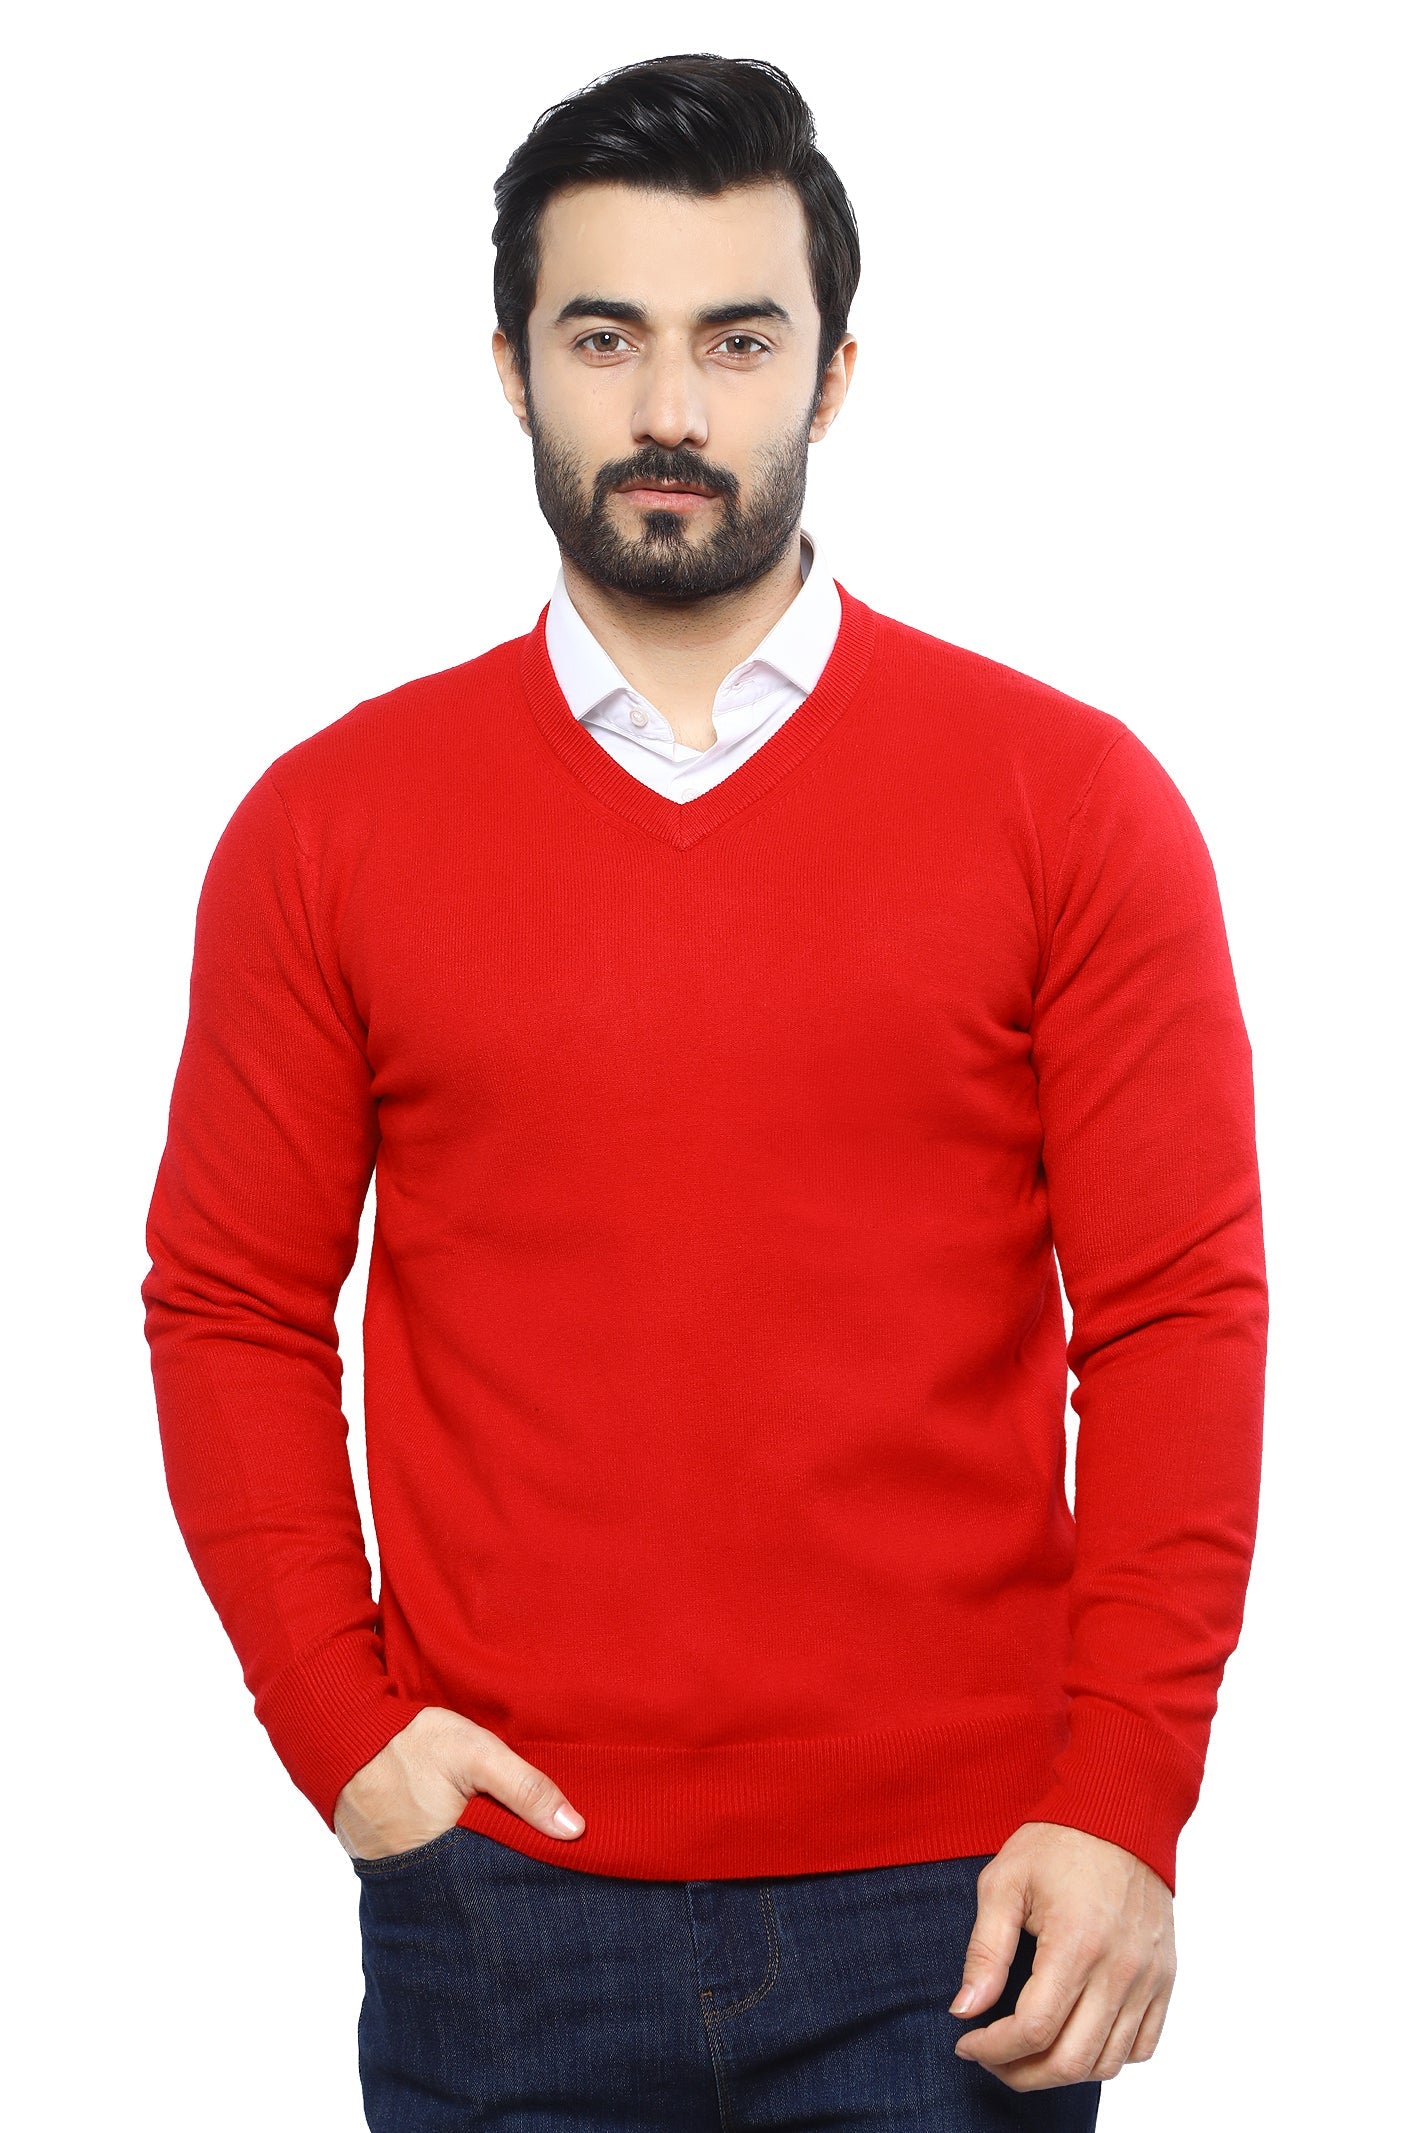 Gents Sweater SKU: SA608-RED - Diners